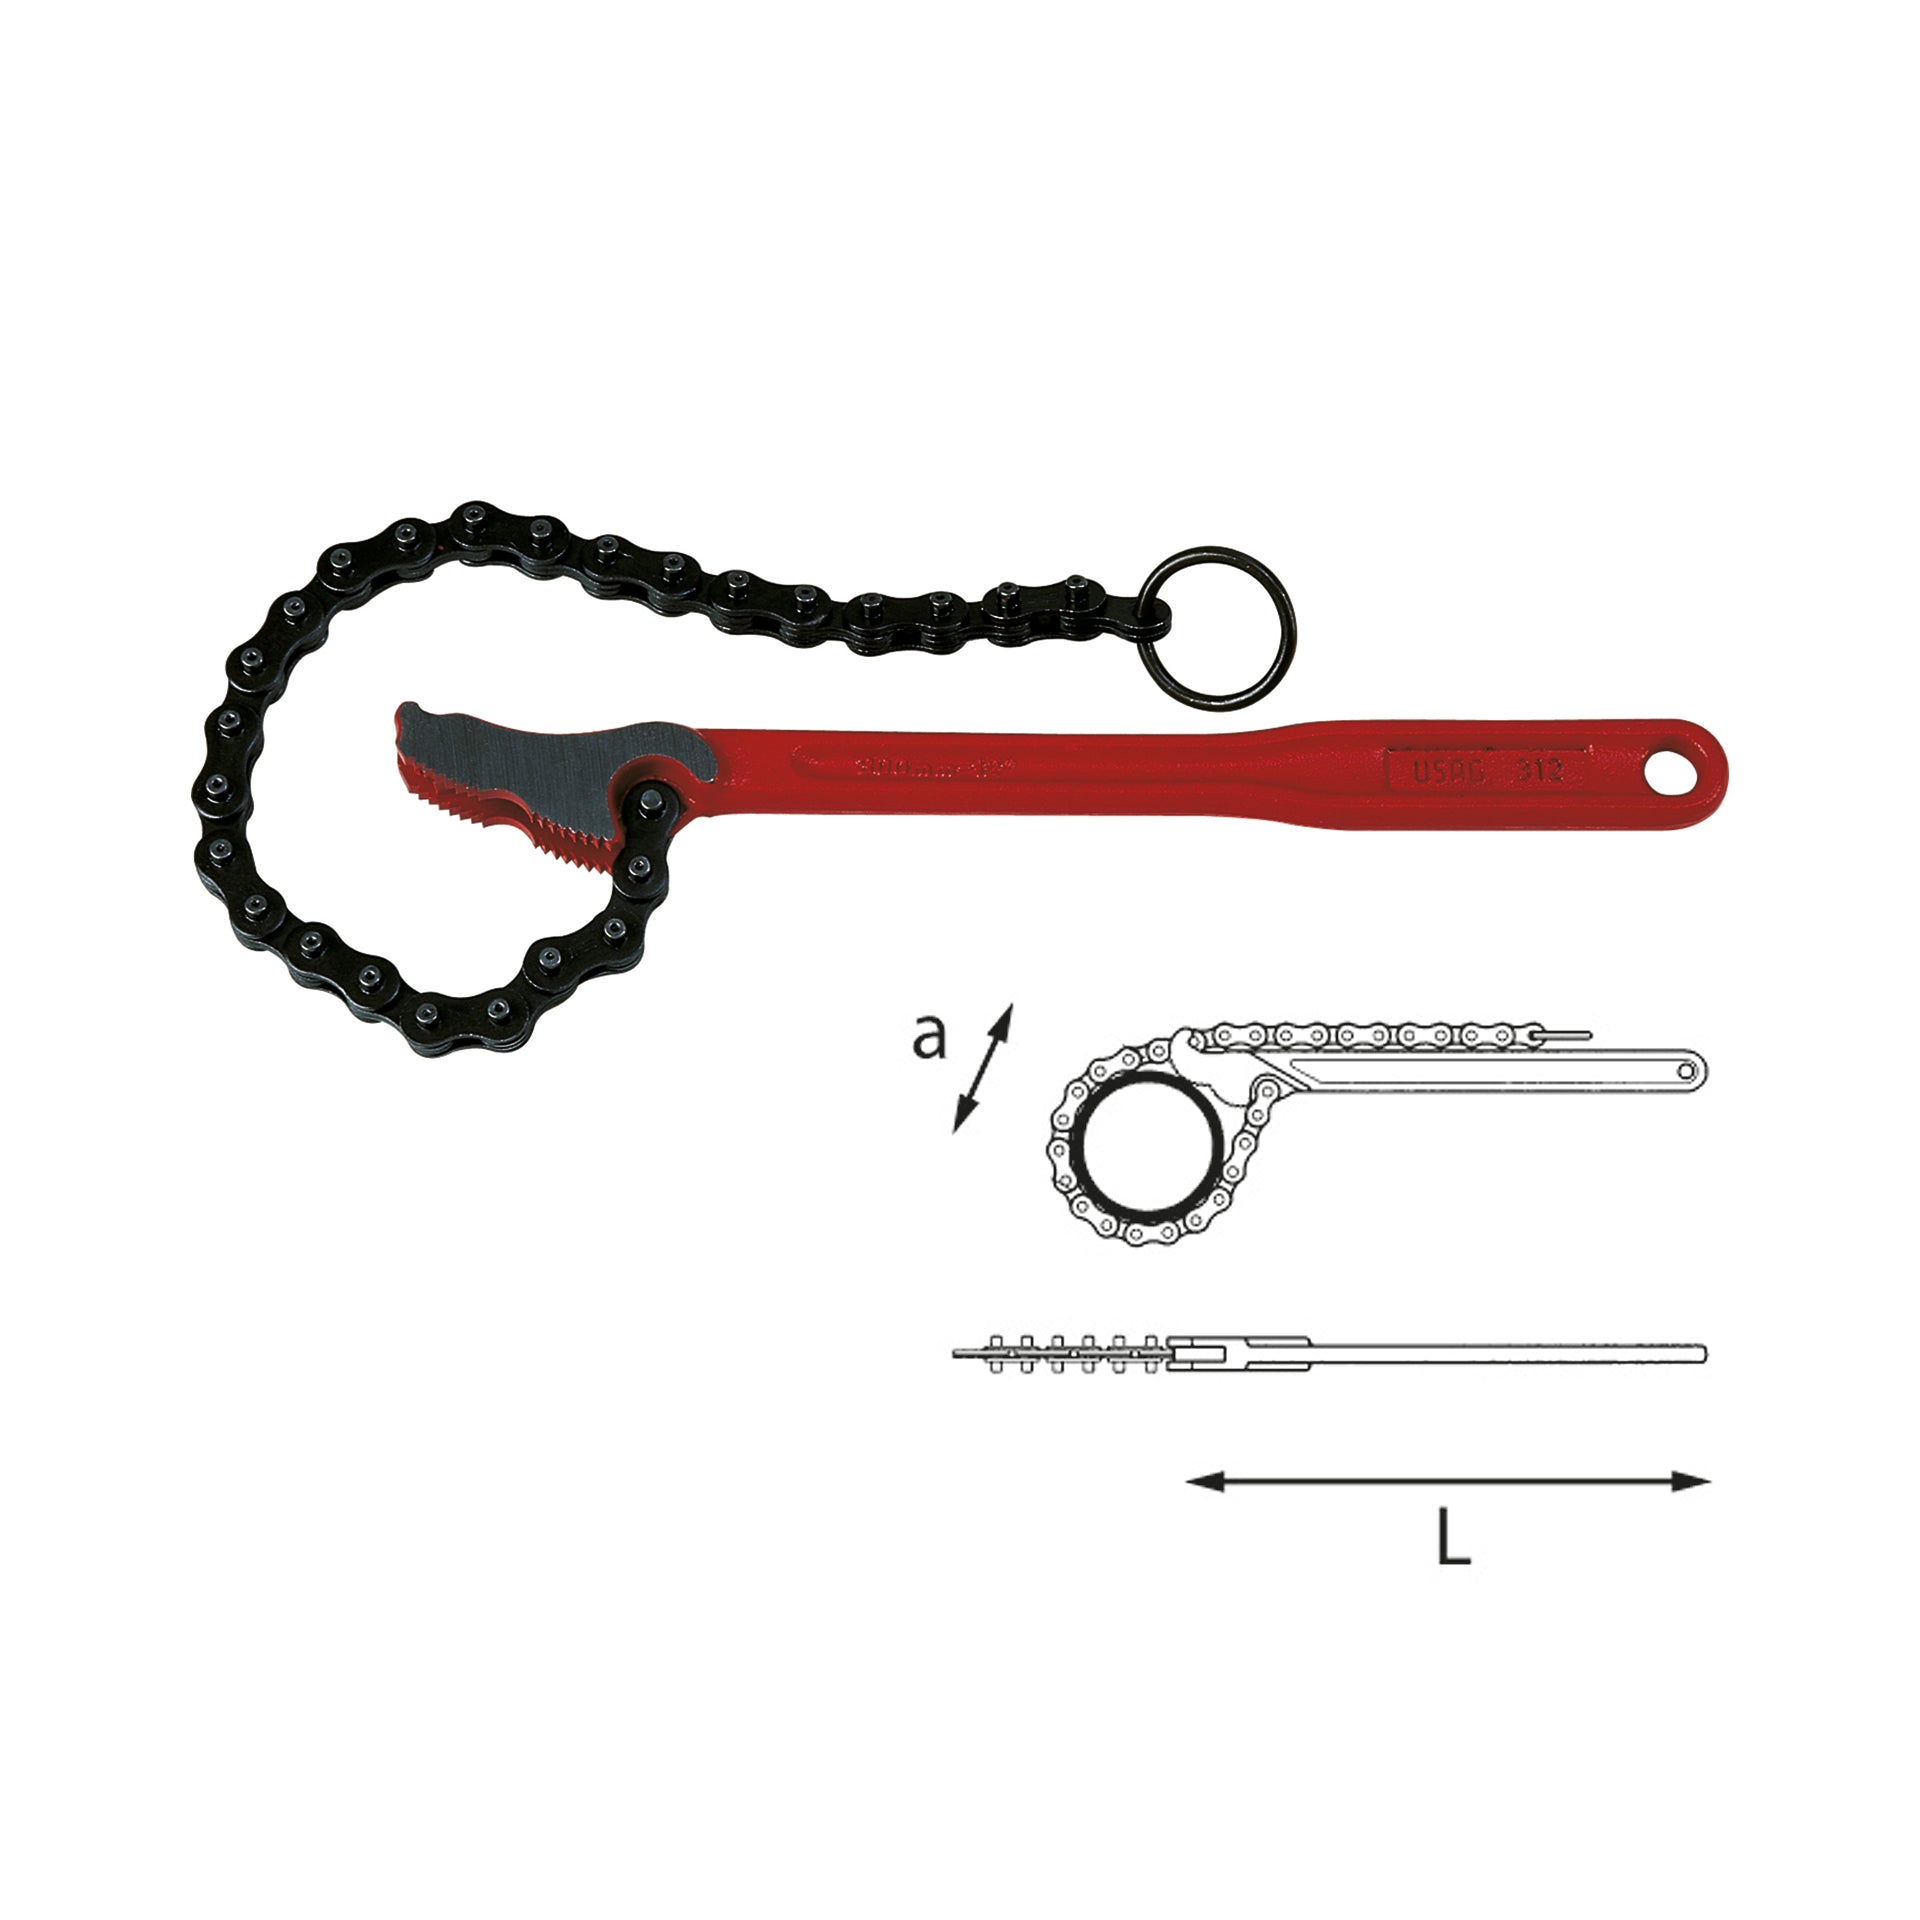 Light- duty chain wrench 2÷4" a 115mm L 311,5mm - Usag 312